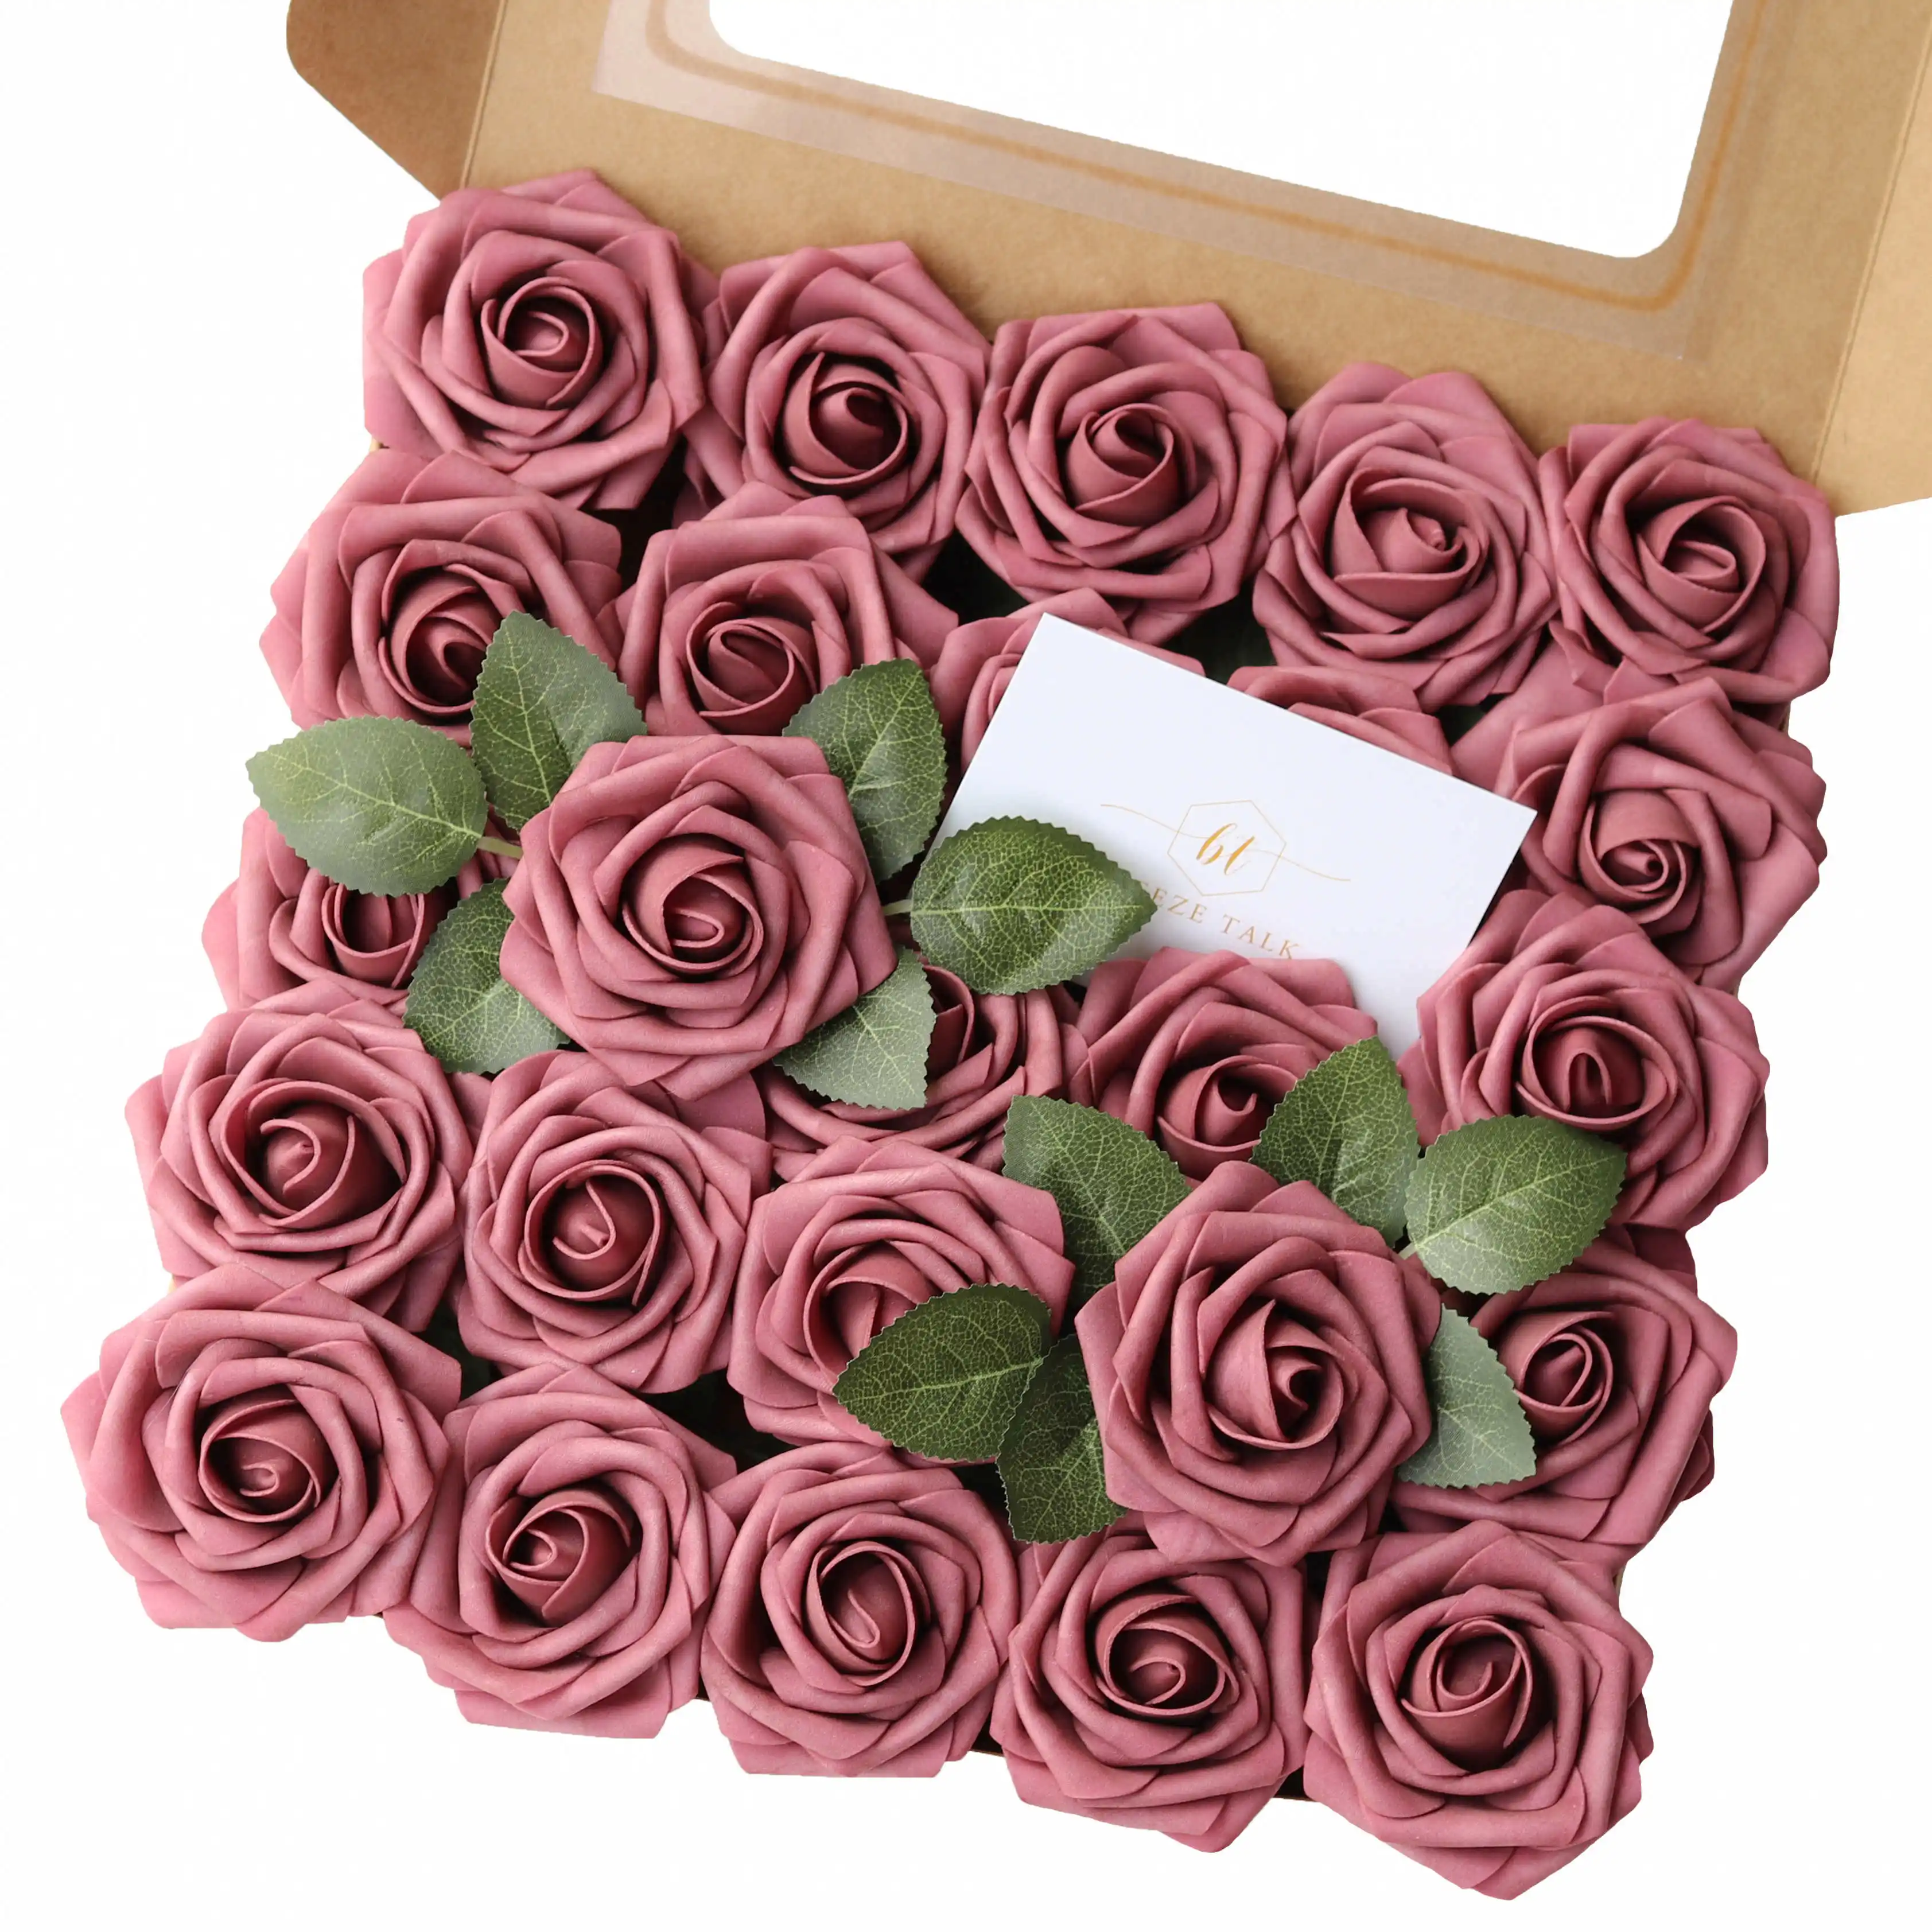 Real Looking Roses Colorful Material Decorative Artificial Flower Single Mauve Rose Flower for